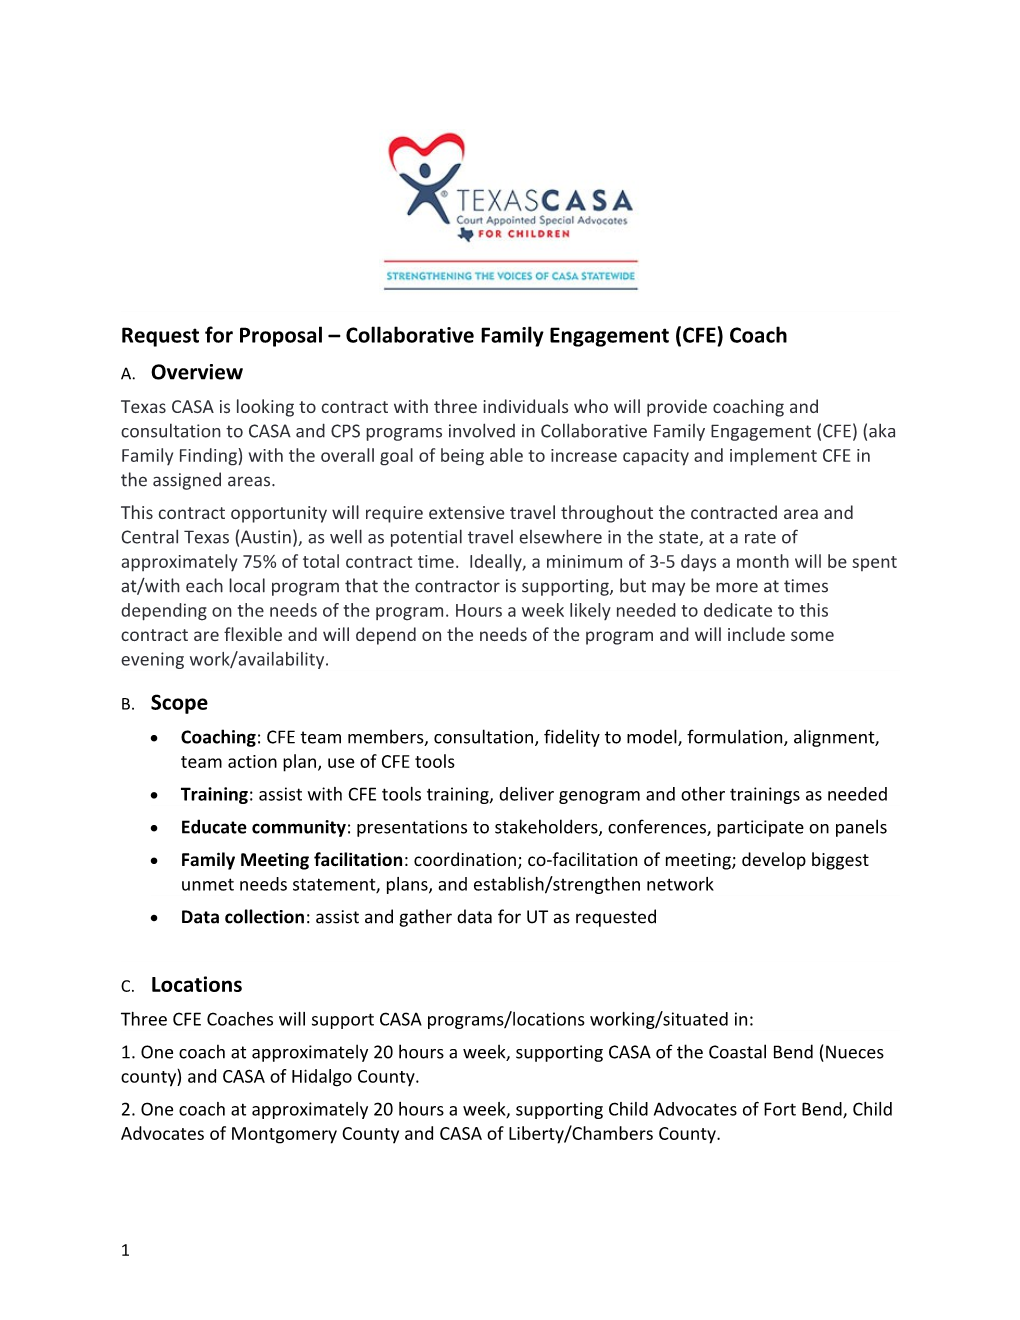 Request for Proposal Collaborative Family Engagement (CFE) Coach